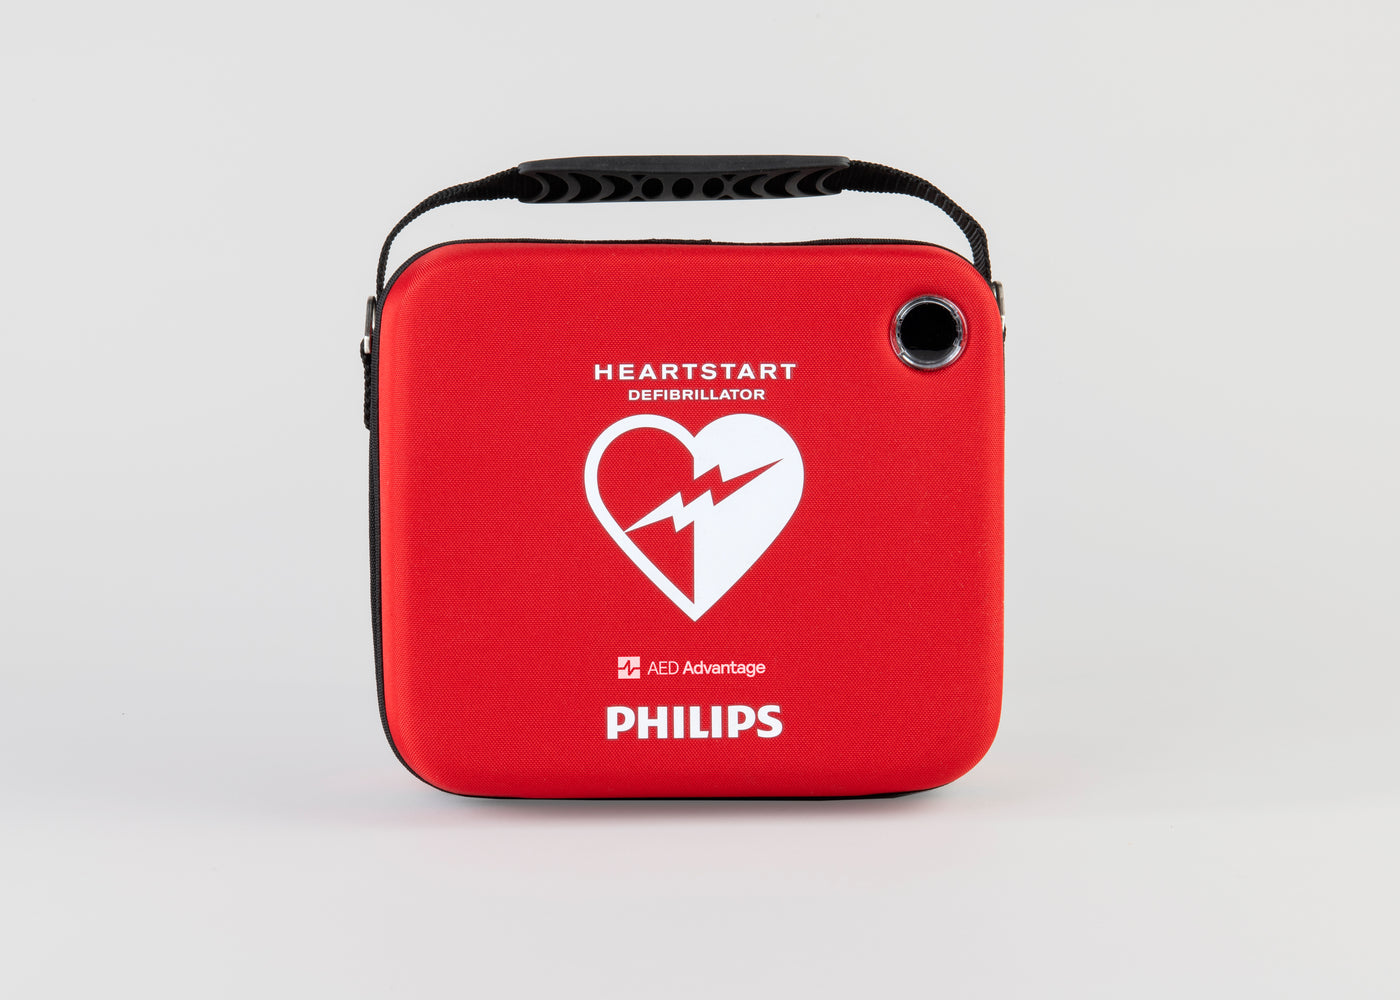 A bright red square-shaped carry case for the Philips OnSite defibrillator